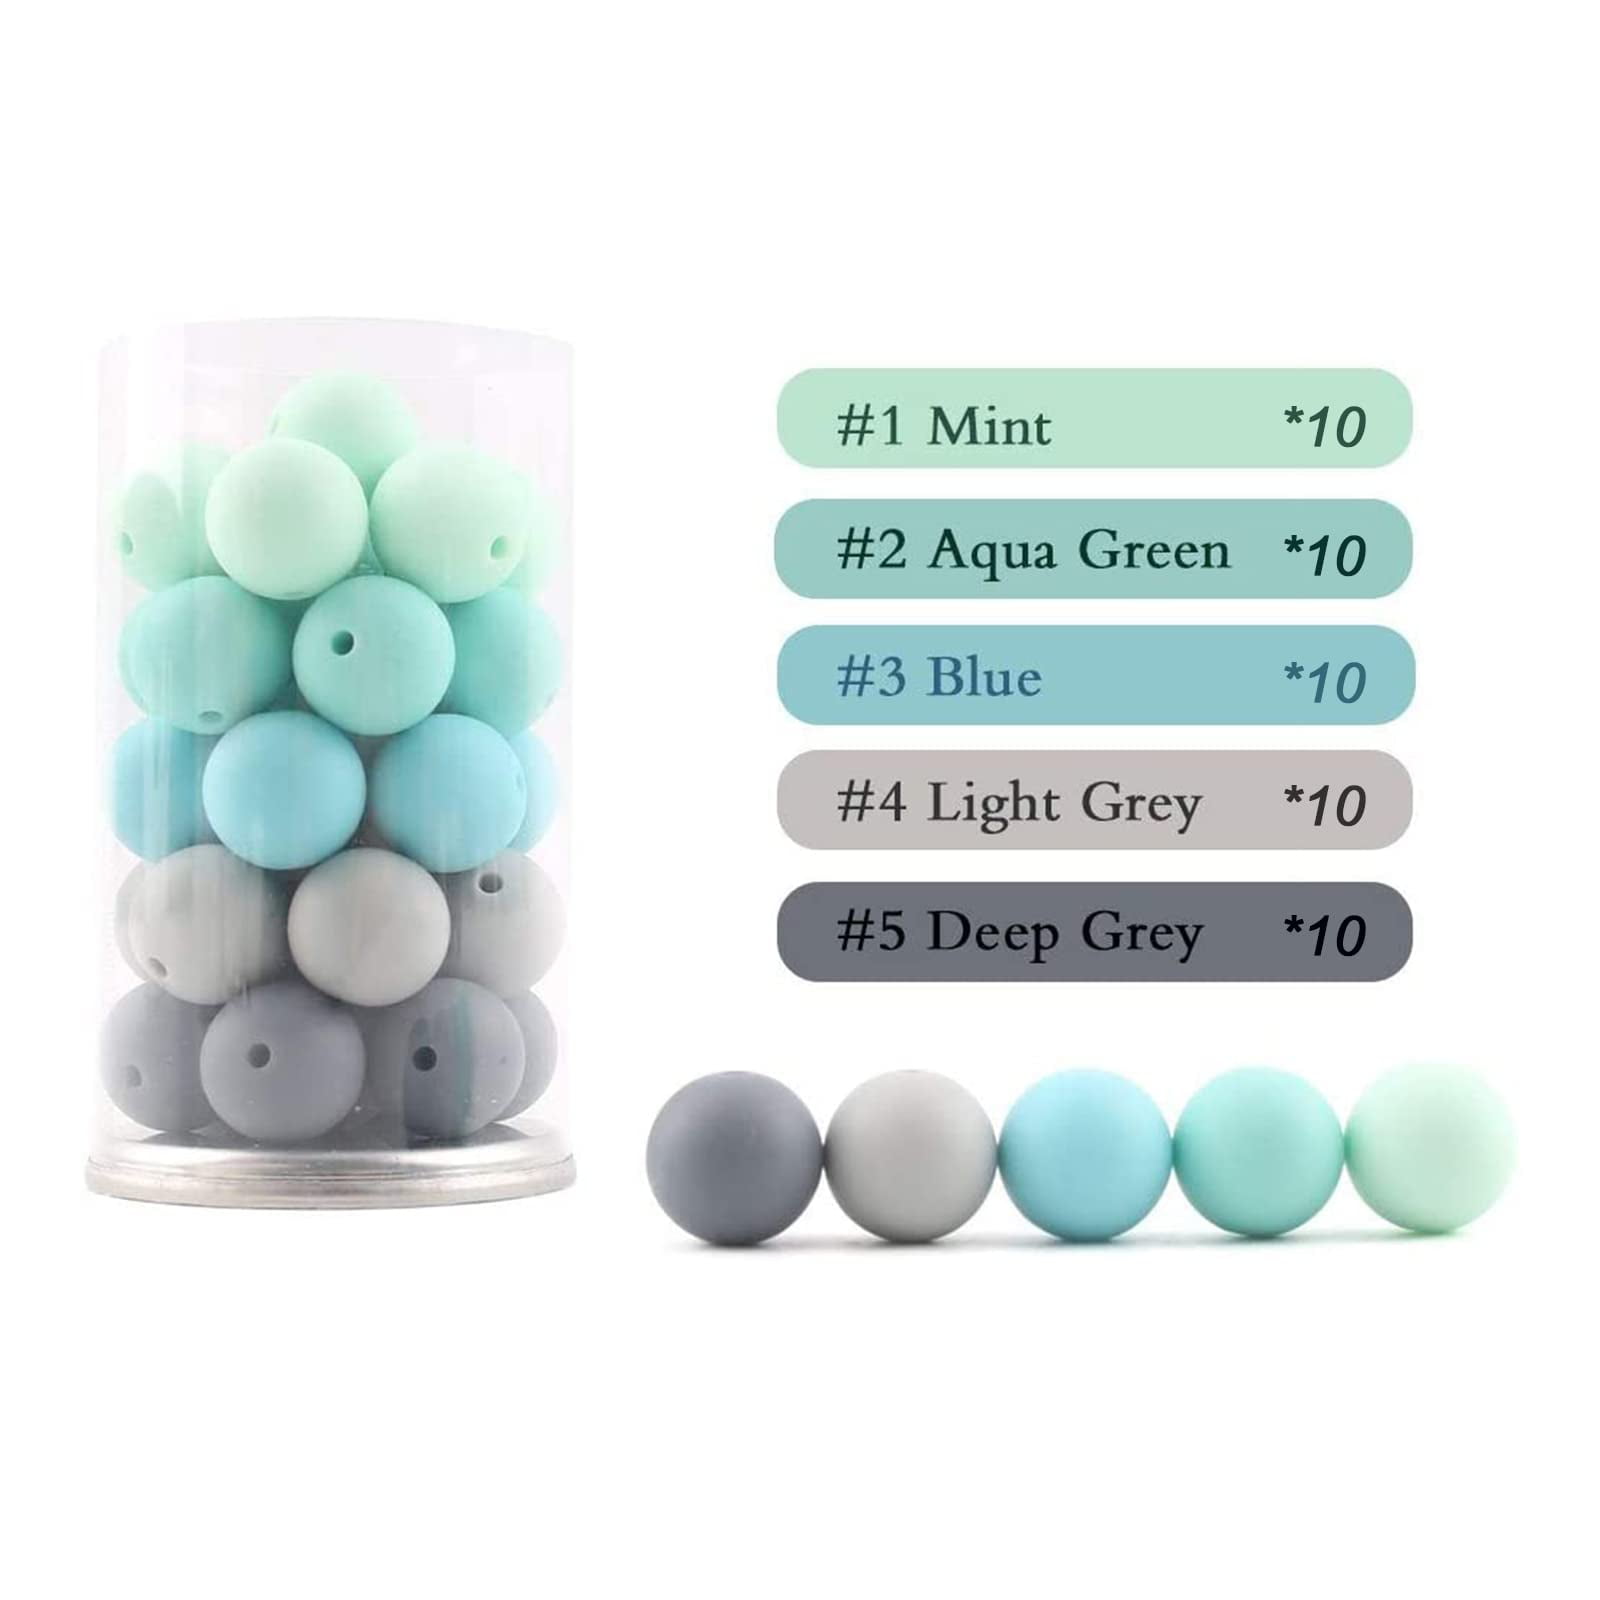 50PCS 15MM Baby Silicone Beads – Weekjoey